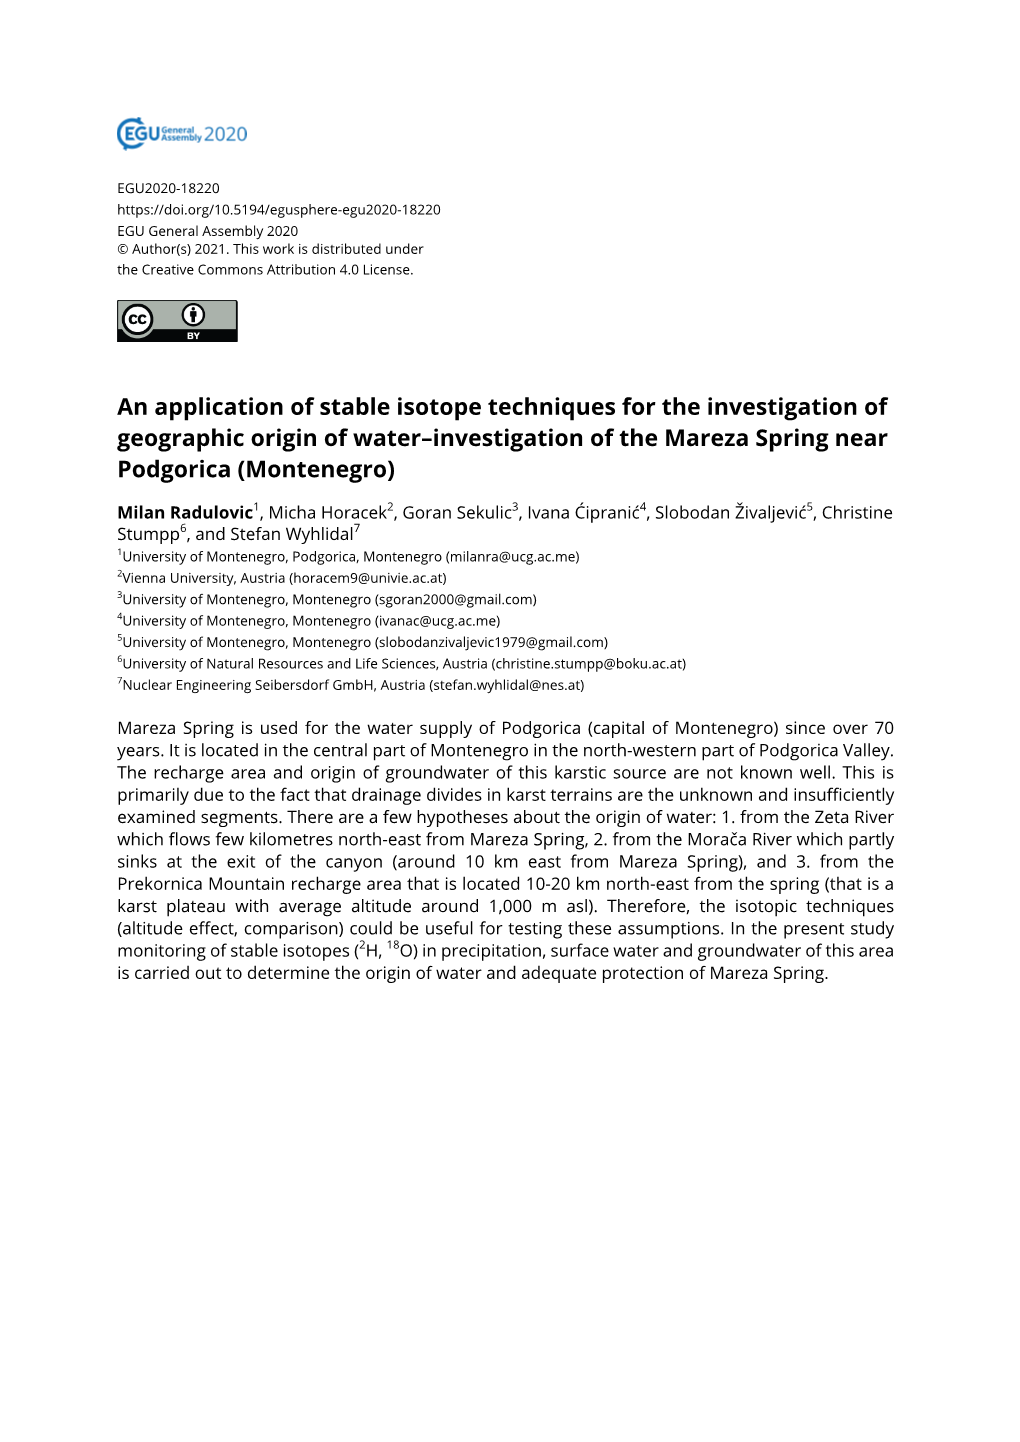 An Application of Stable Isotope Techniques for the Investigation of Geographic Origin of Water–Investigation of the Mareza Spring Near Podgorica (Montenegro)